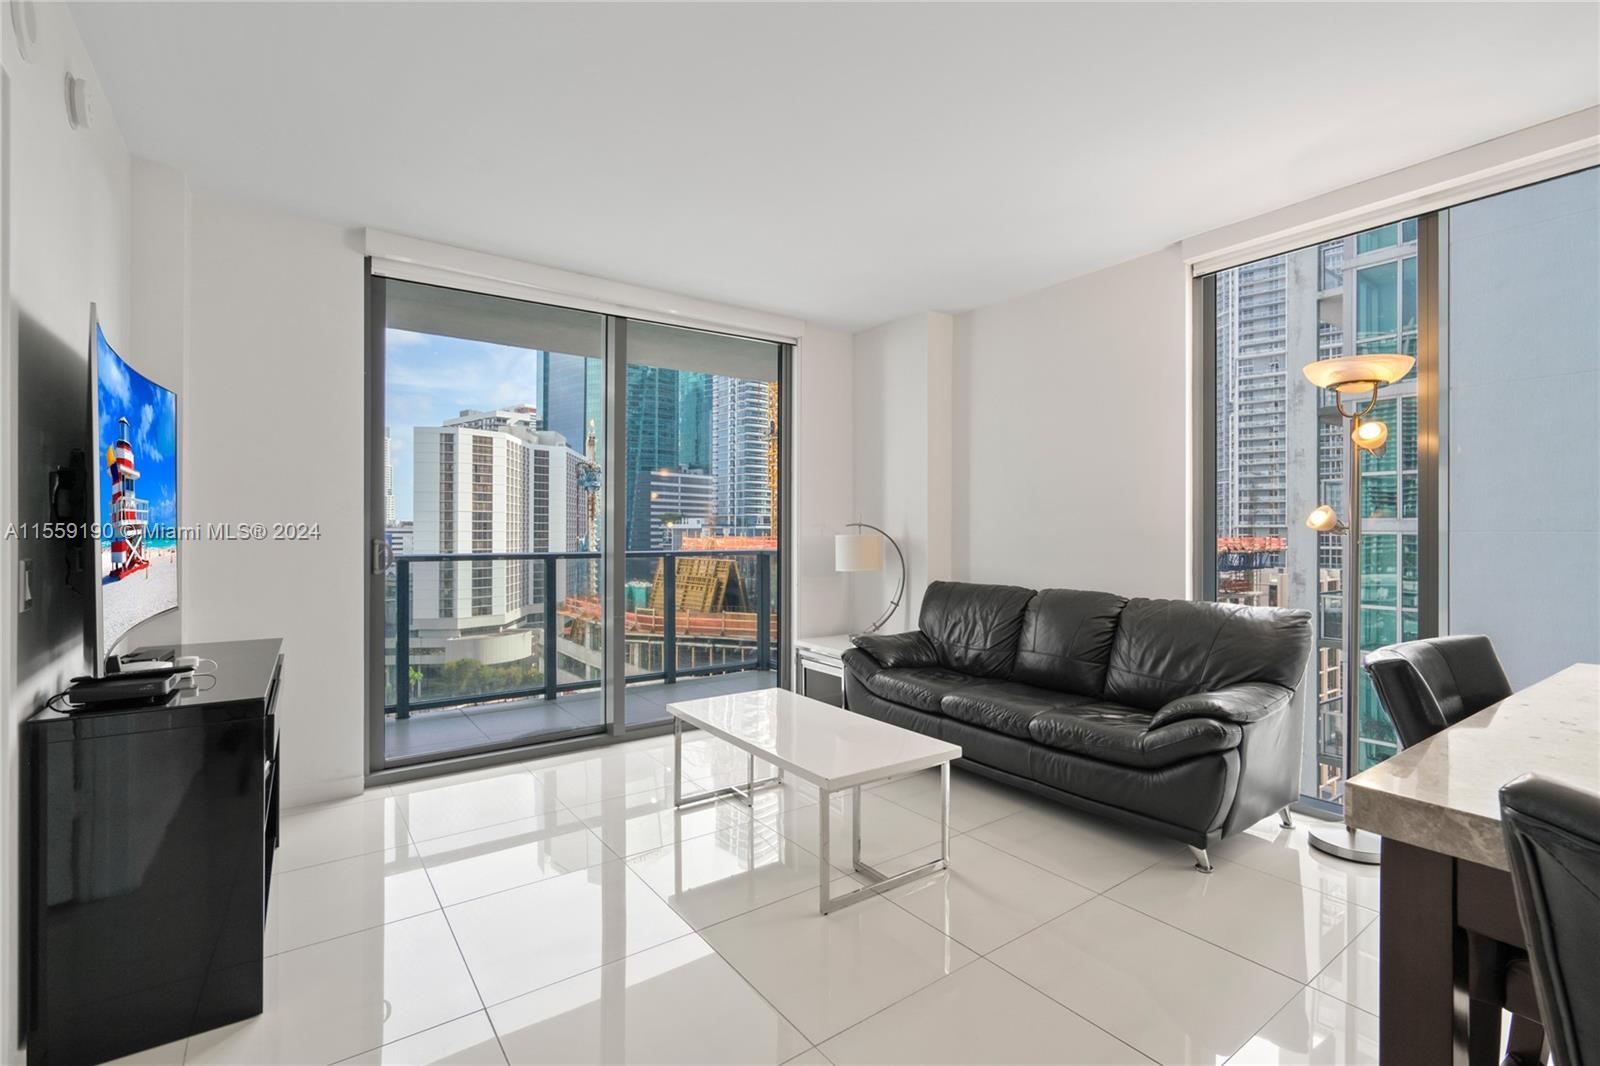 Desirable furnished 2 bedroom 2 bathroom unit at modern boutique building My Brickell. Designed & In